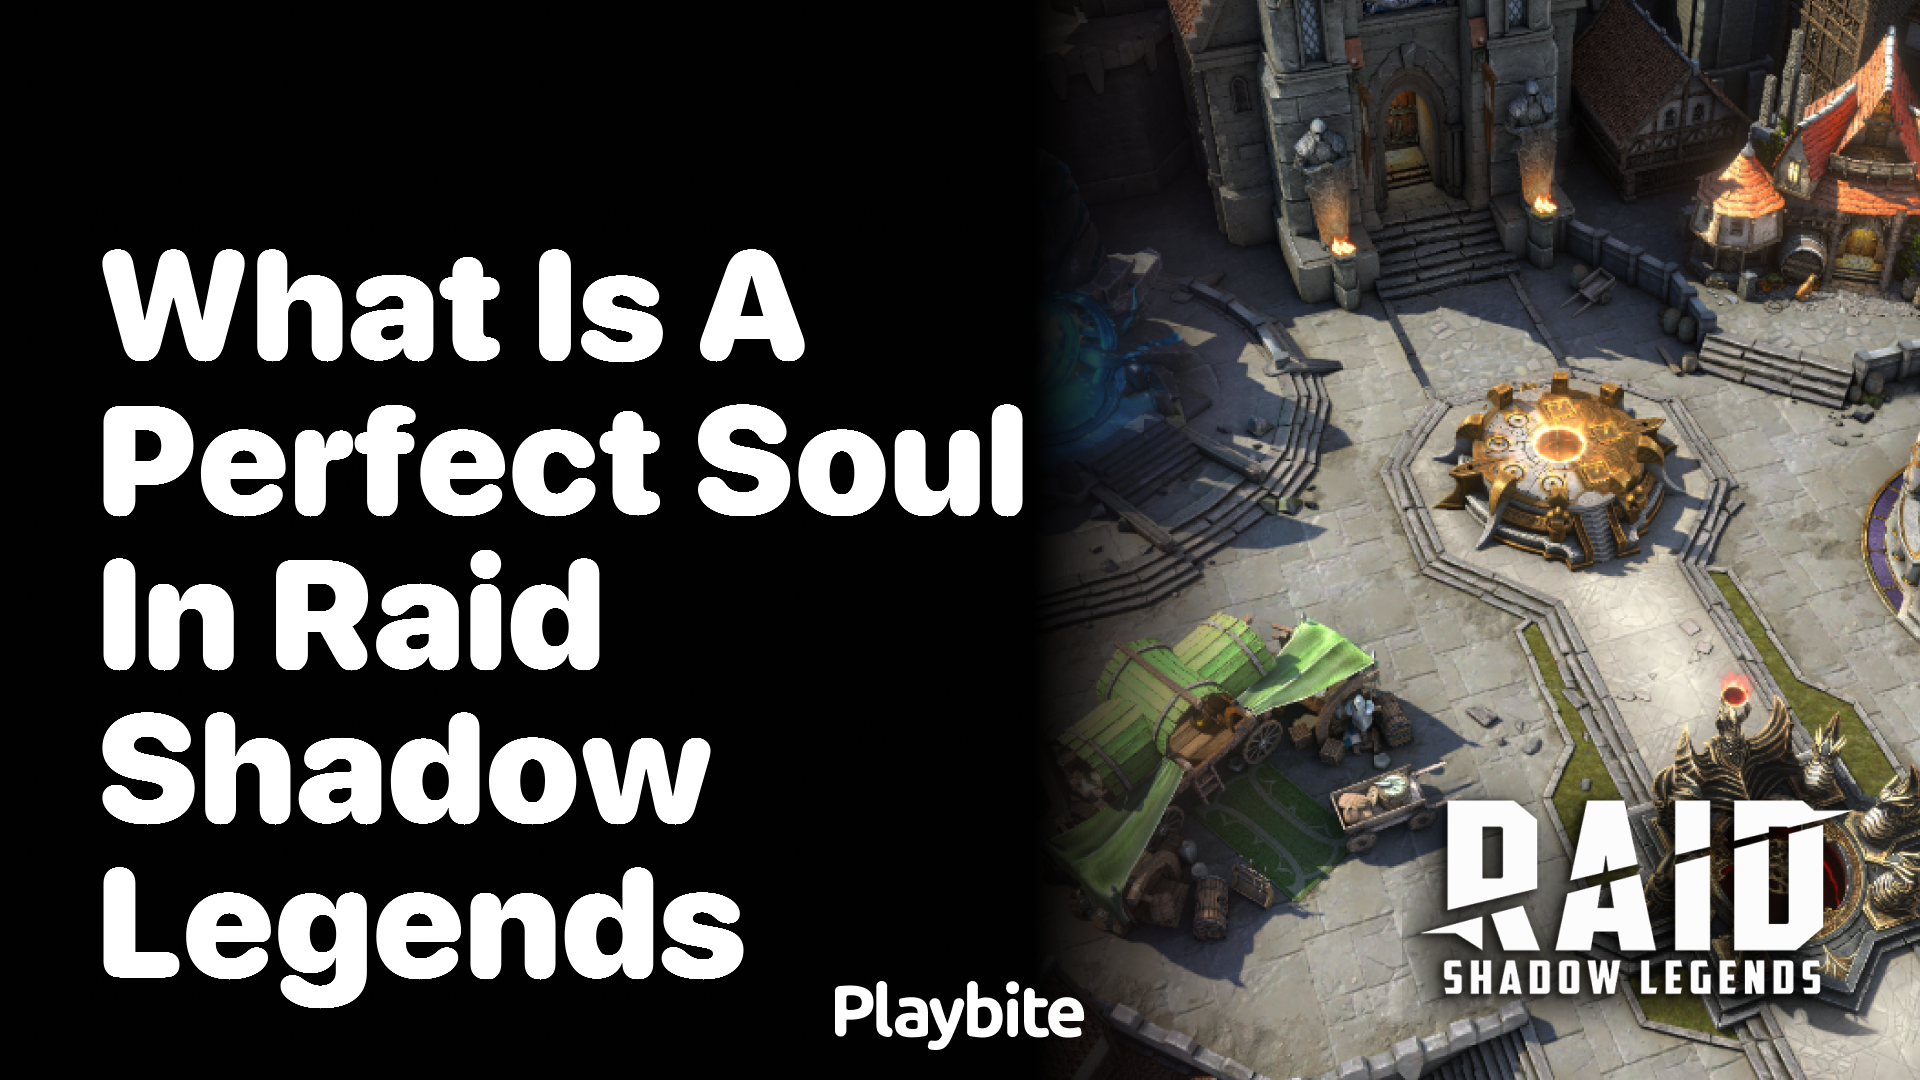 What Is a Perfect Soul in Raid Shadow Legends?